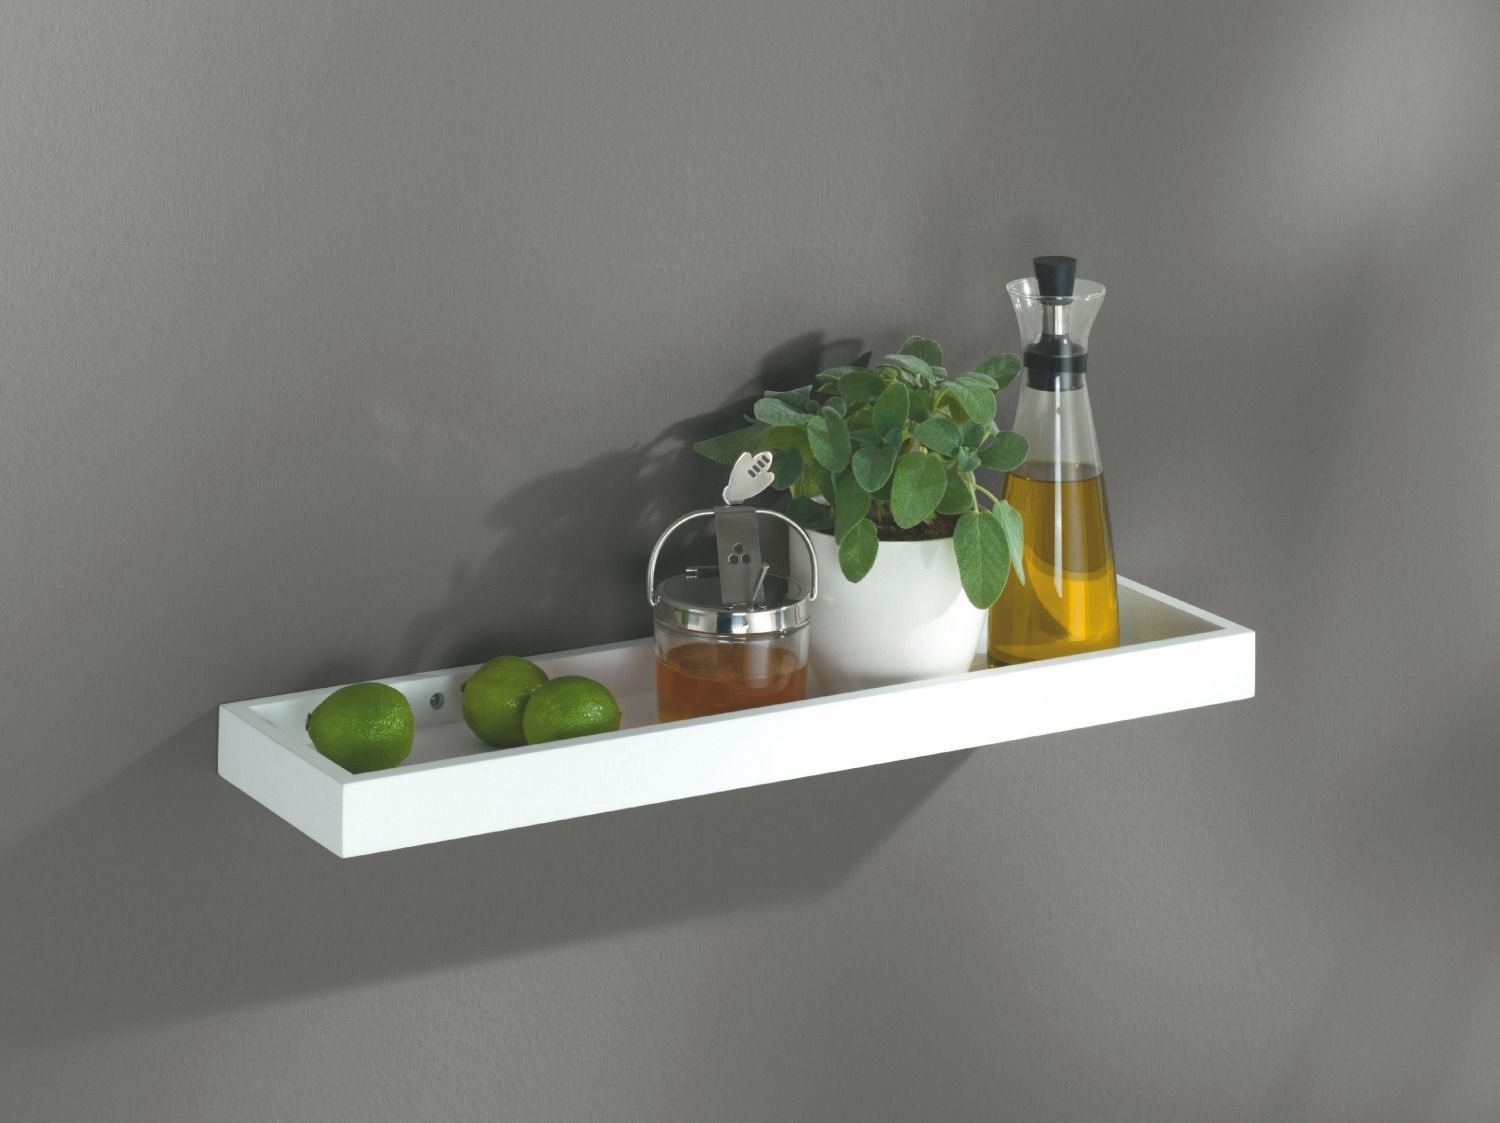 Floating Shelves Floating Wall Shelves In Great Variety Of Sizes Intended For Floating Wall Shelves (View 14 of 15)